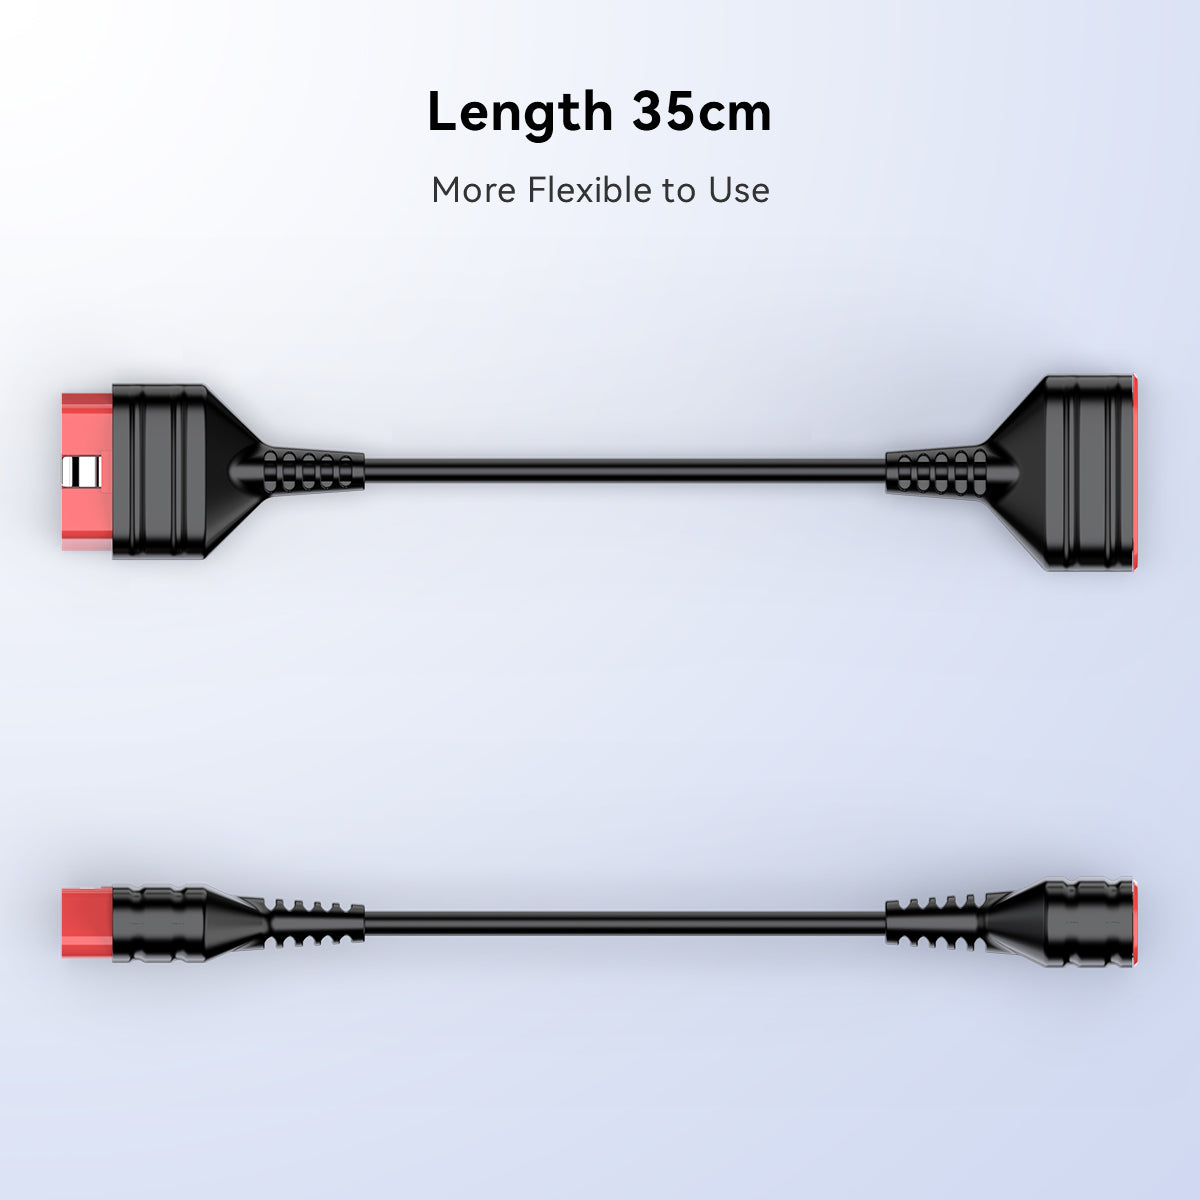 THINKDIAG EXTENSION CABLE